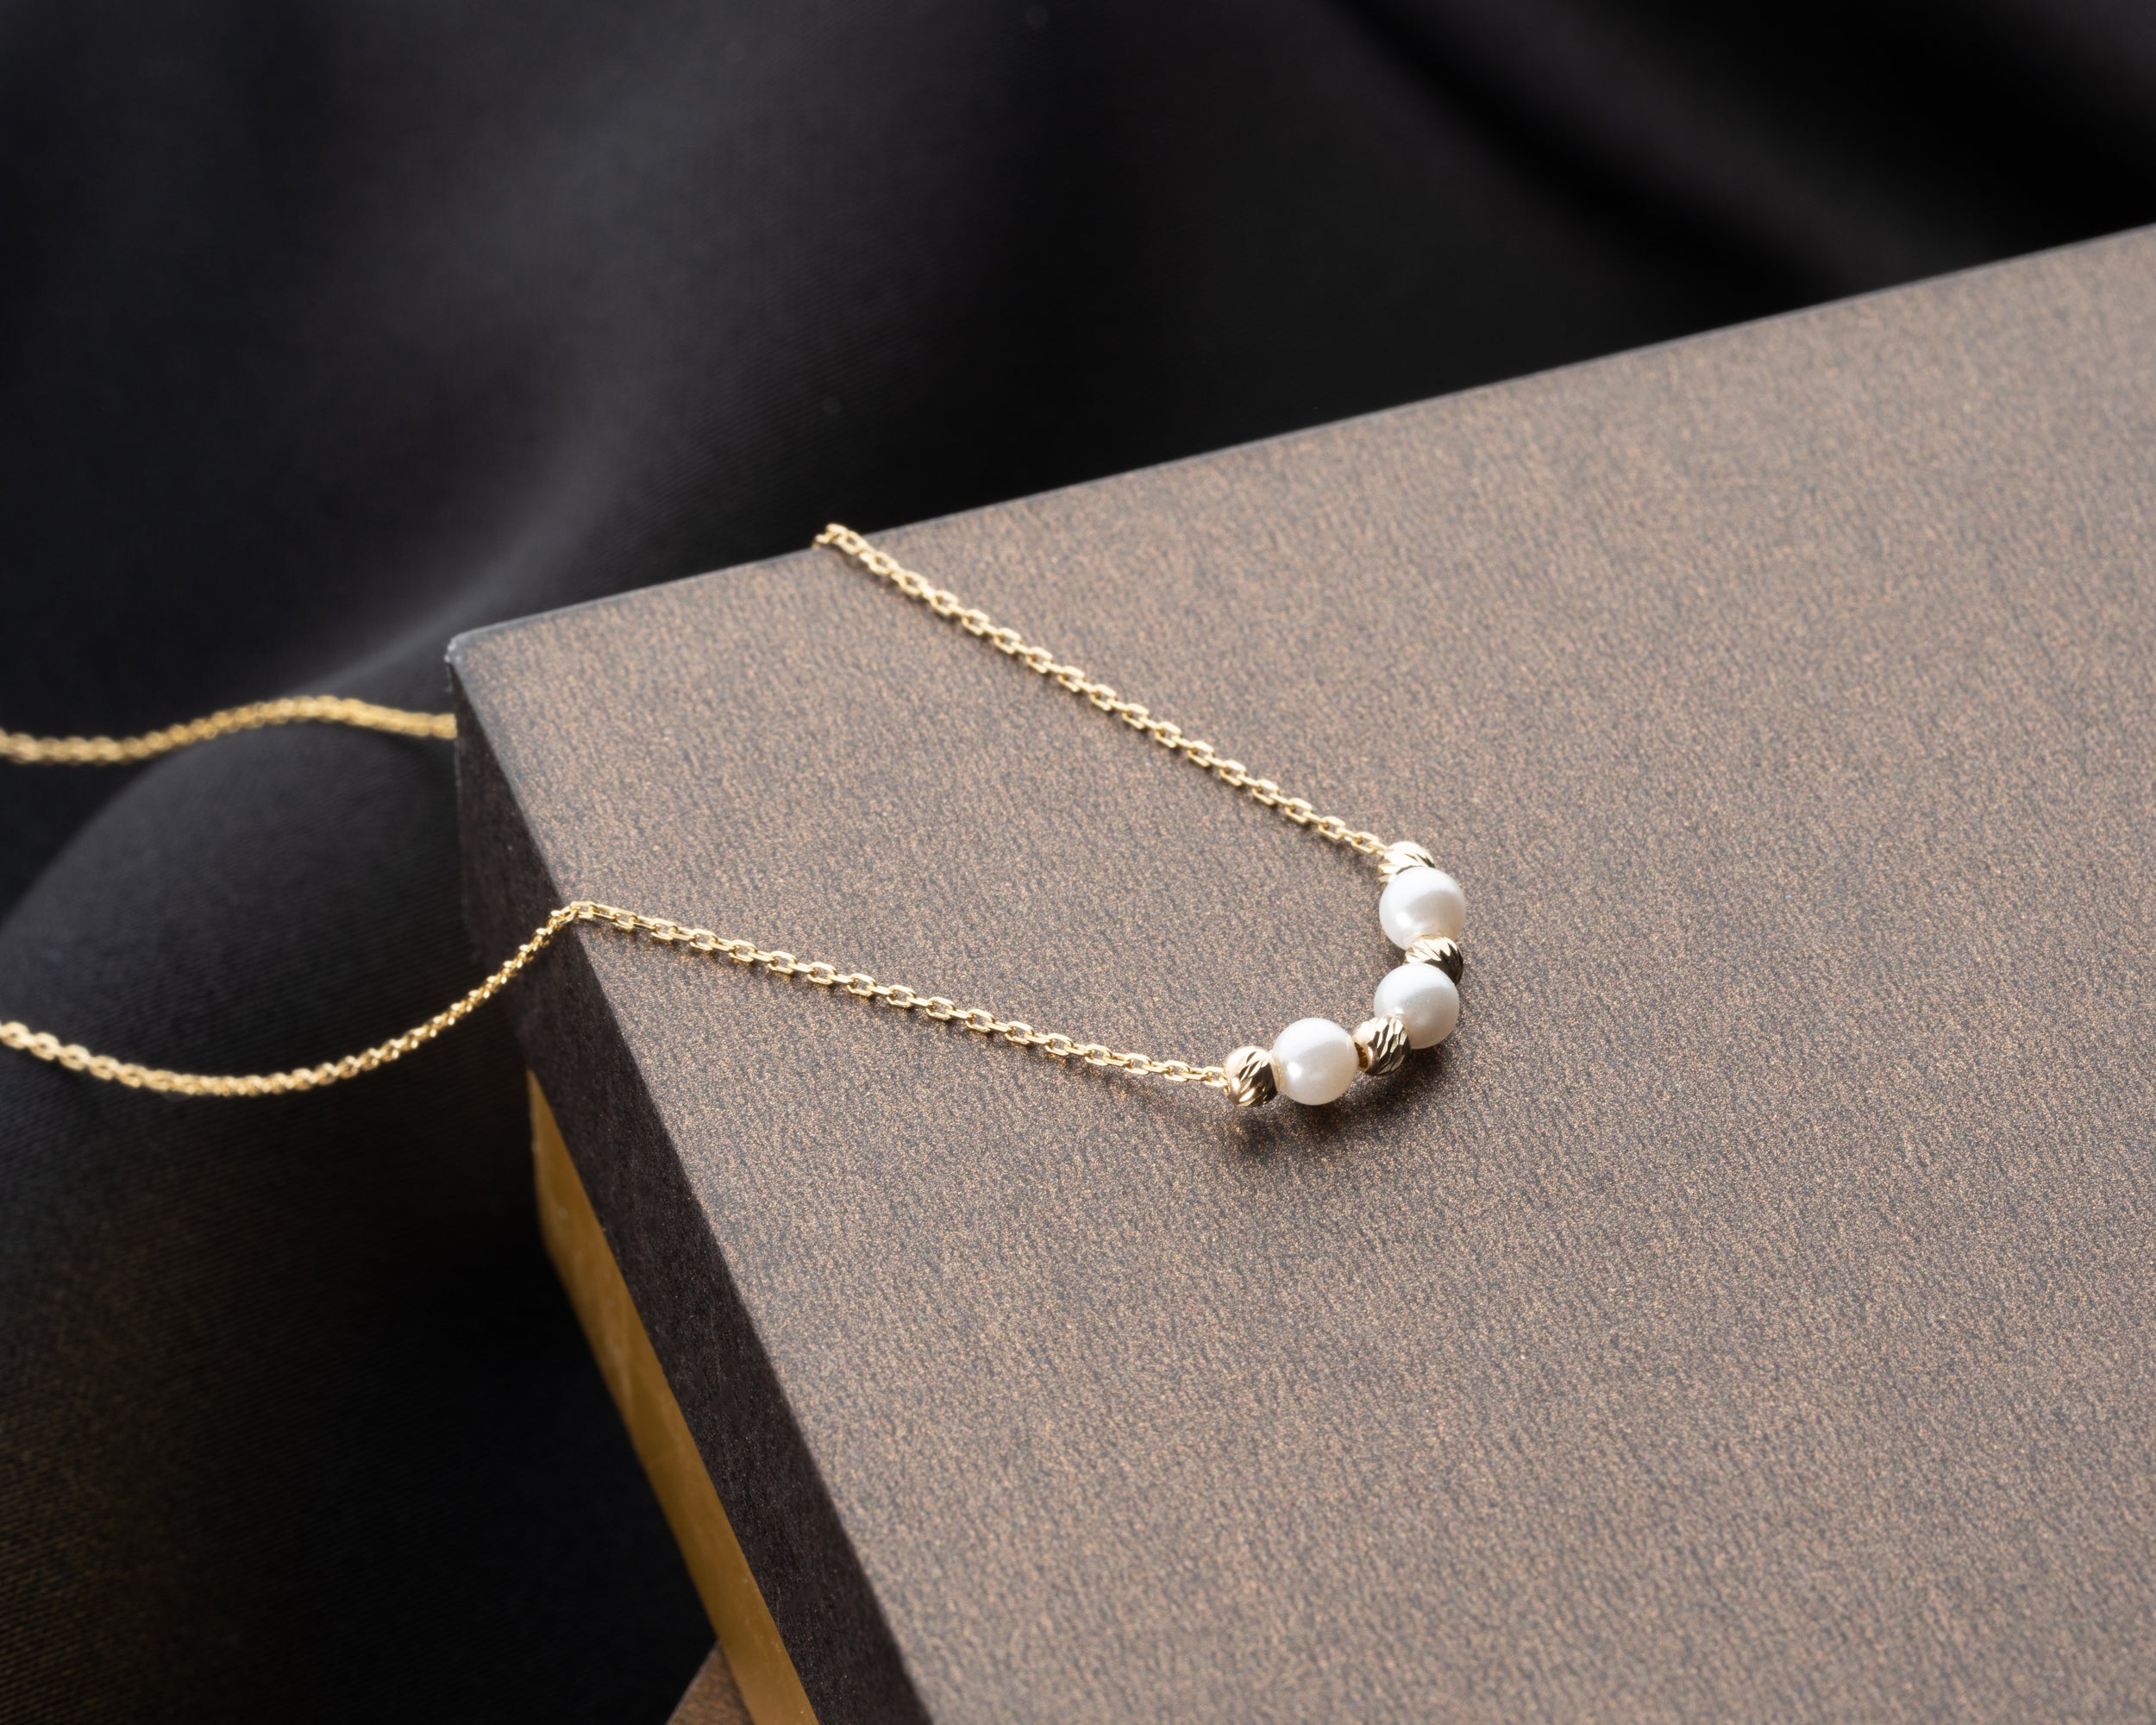 Elegant Pearl and Gold Bead Necklace